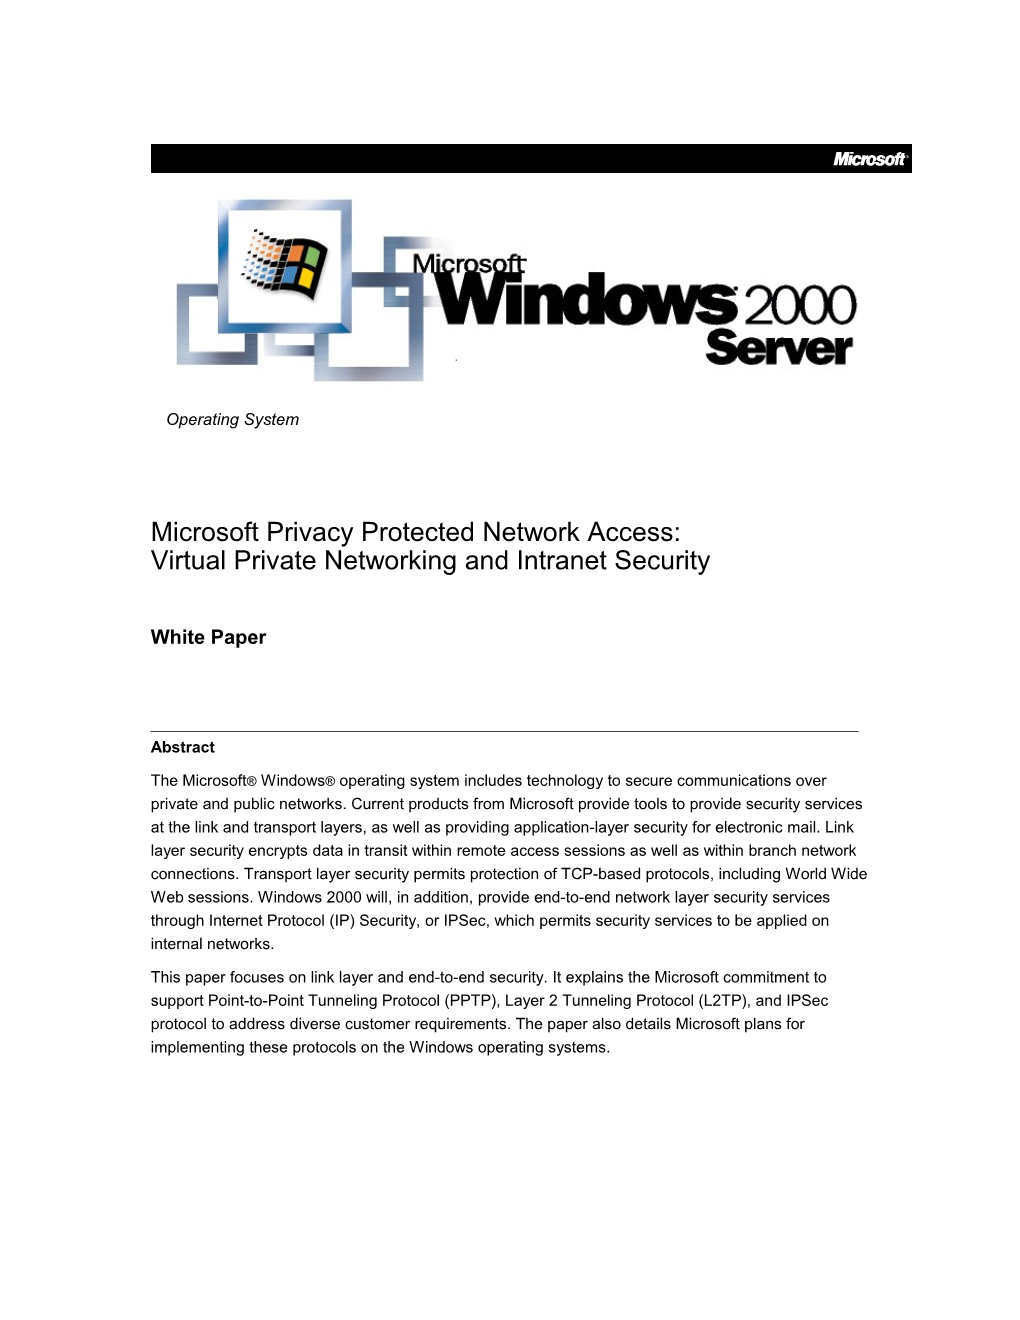 Microsoft Privacy Protected Network Access